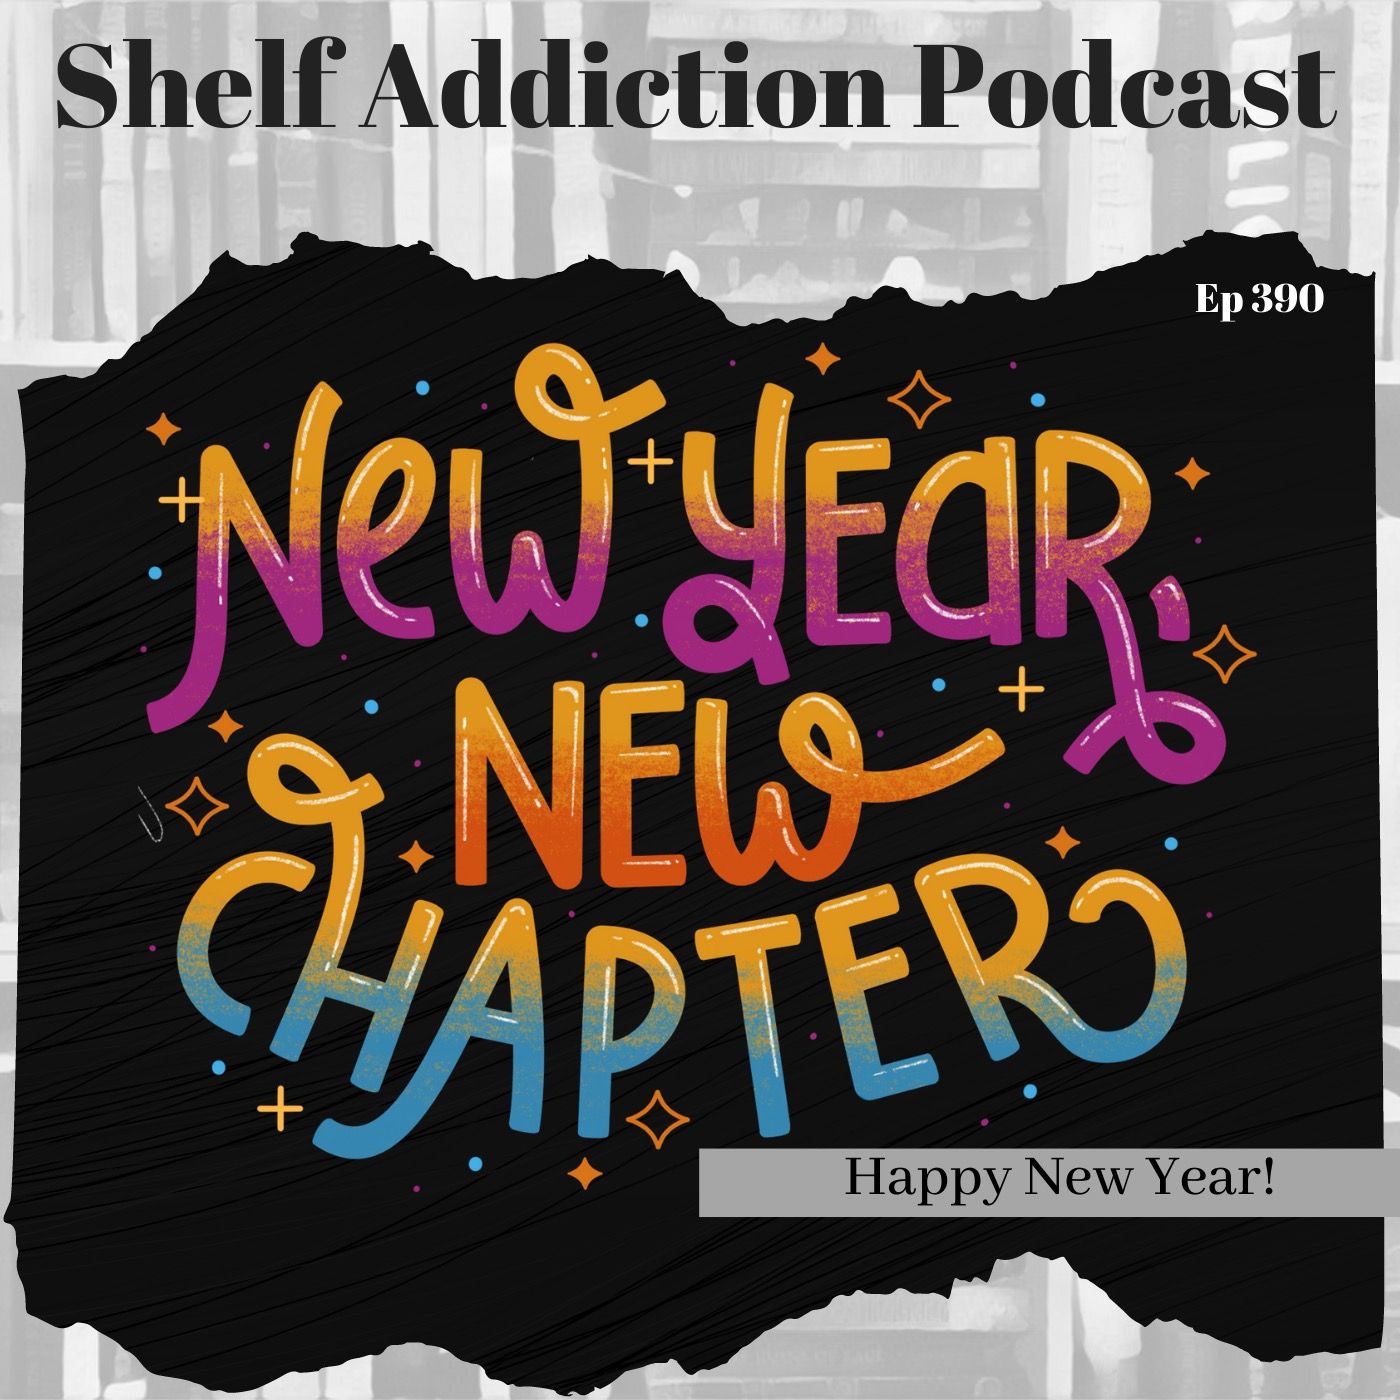 New Year, New Challenges | Book Chat